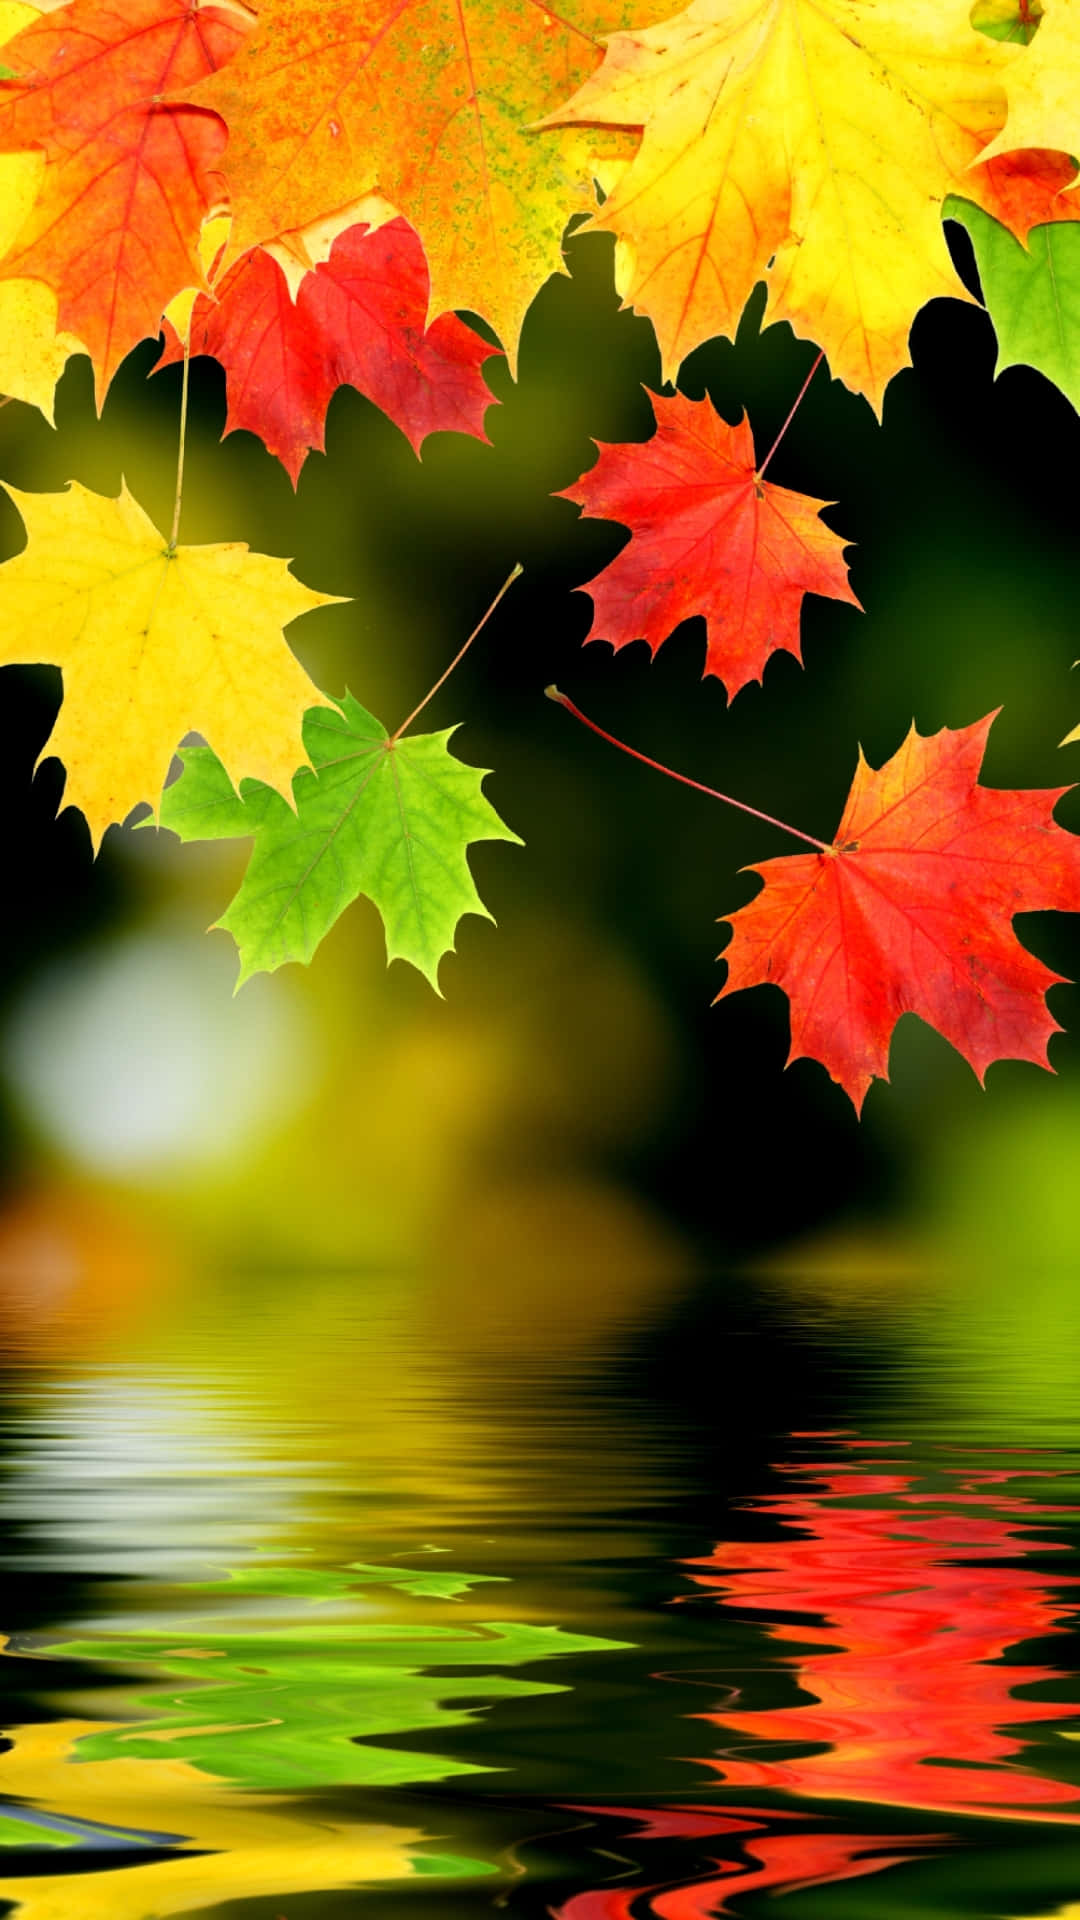 Autumn Iphone 6 Plus With Falling Leaves Wallpaper